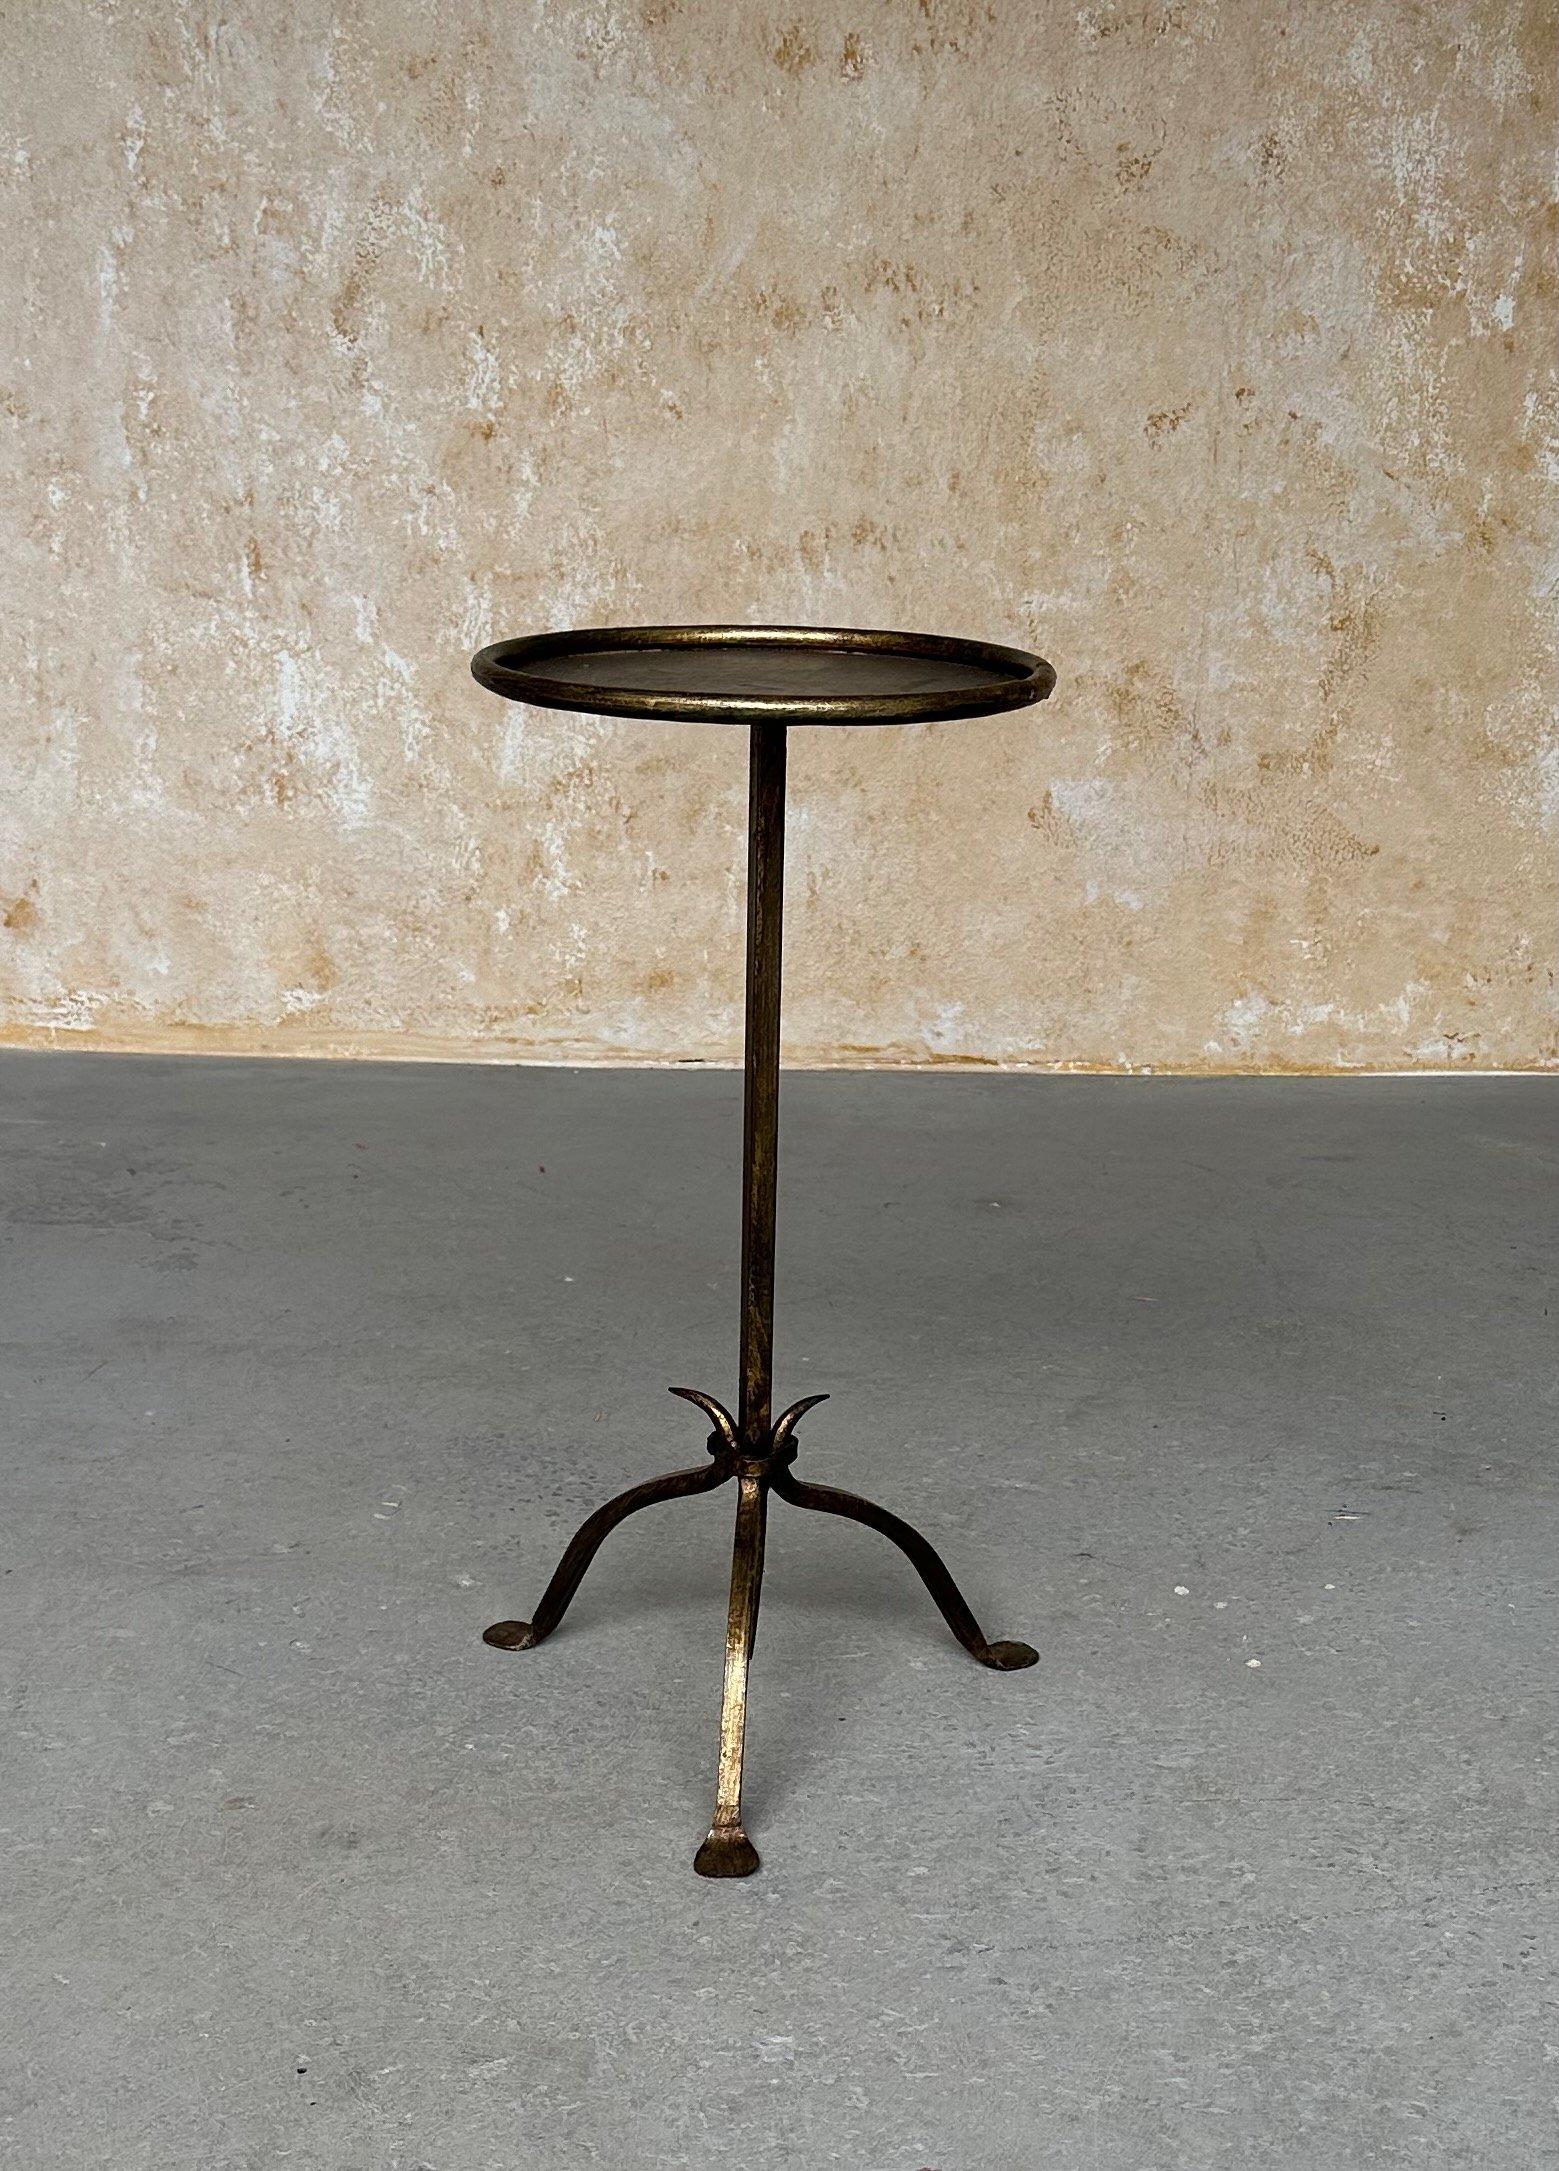 This lovely Spanish iron side table was recently created by accomplished artisans using traditional iron-working methods, and has a hand-applied gold patina with dark undertones that replicates the finish in vintage pieces. The table features a